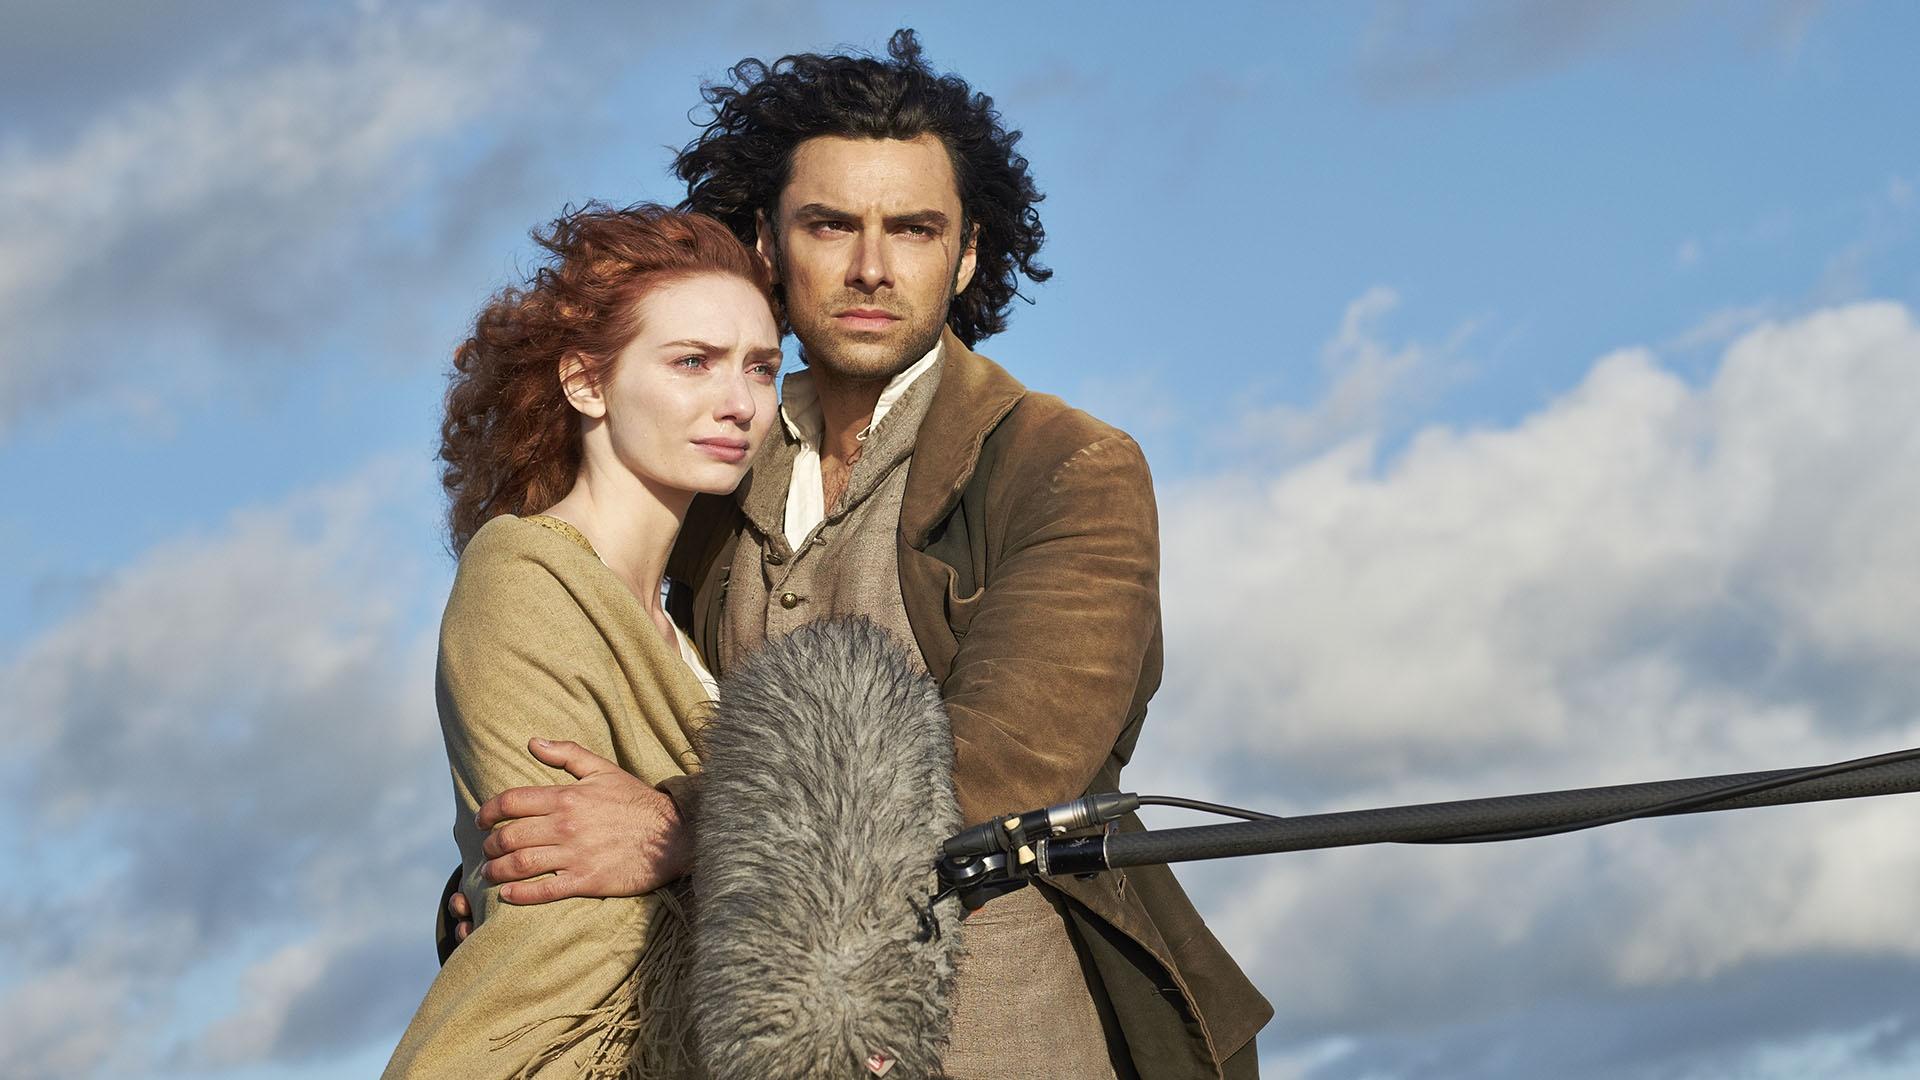 Aidan Turner as Ross Poldark and Eleanor Tomlinson as Damelza in front of a boom mic.